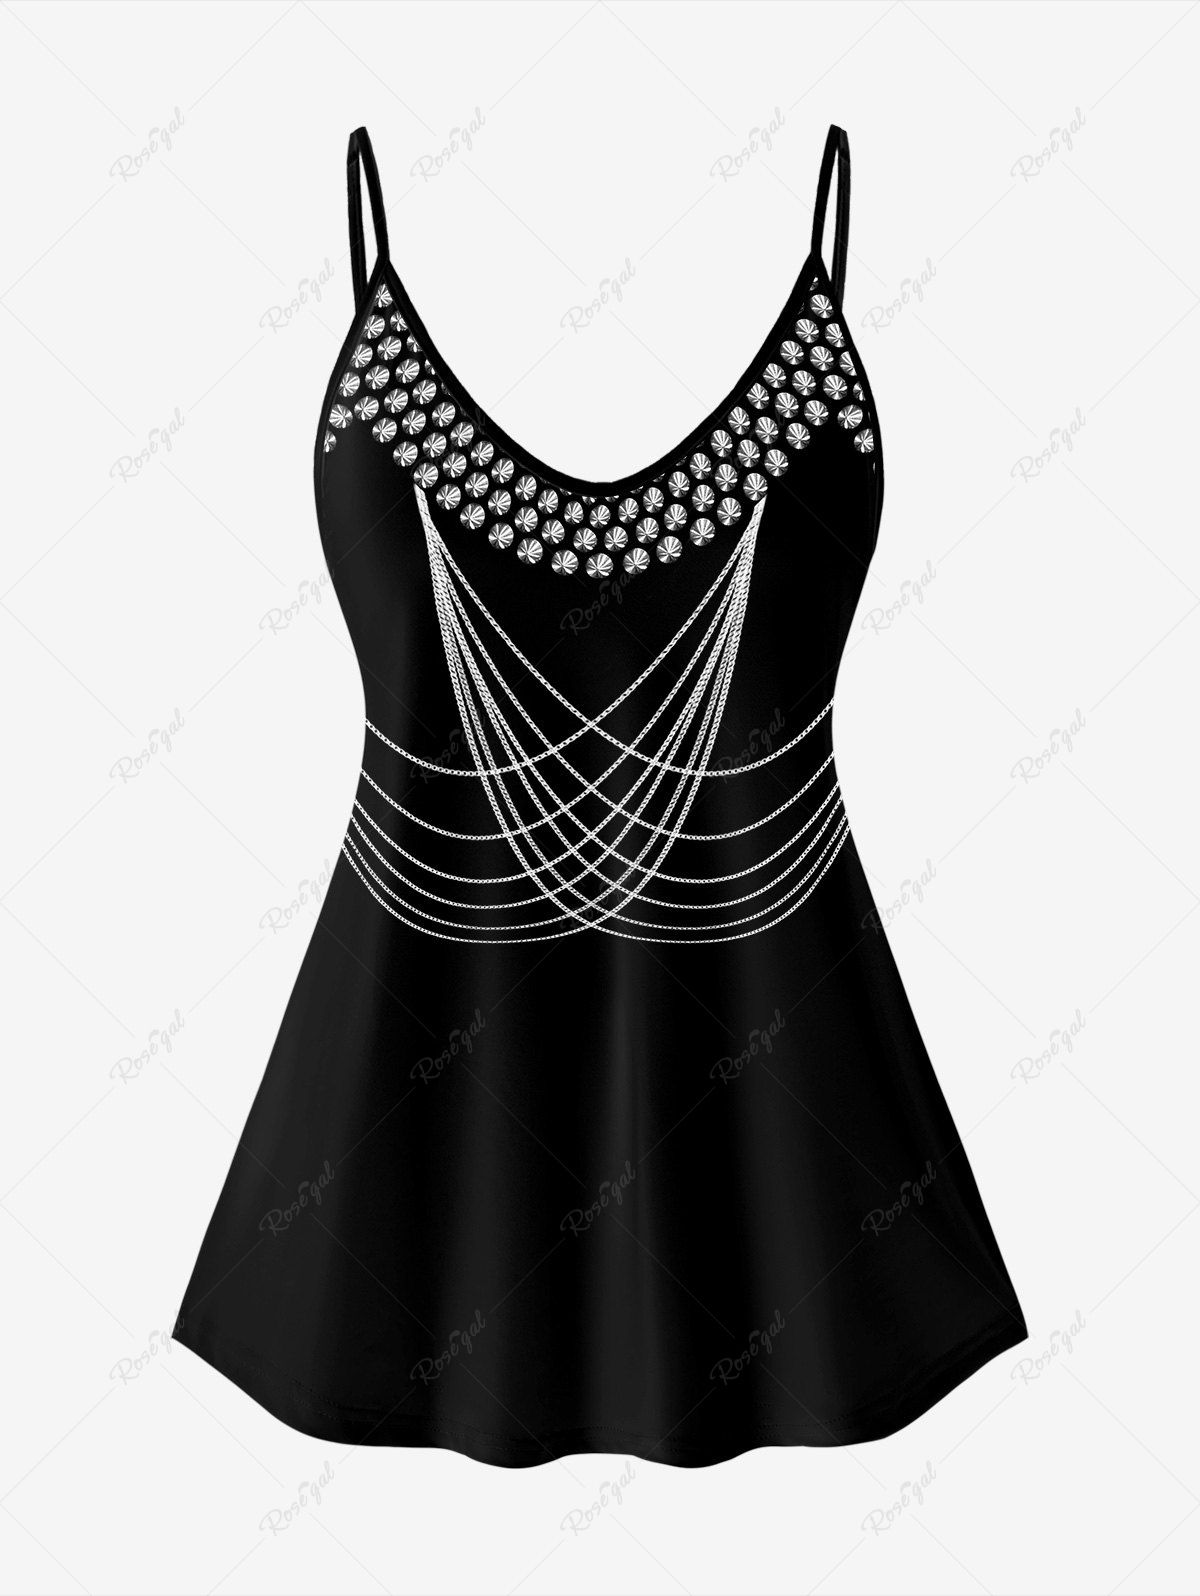 Chic Gothic 3D Chain Rivets Print Cami Top (Adjustable Straps)  